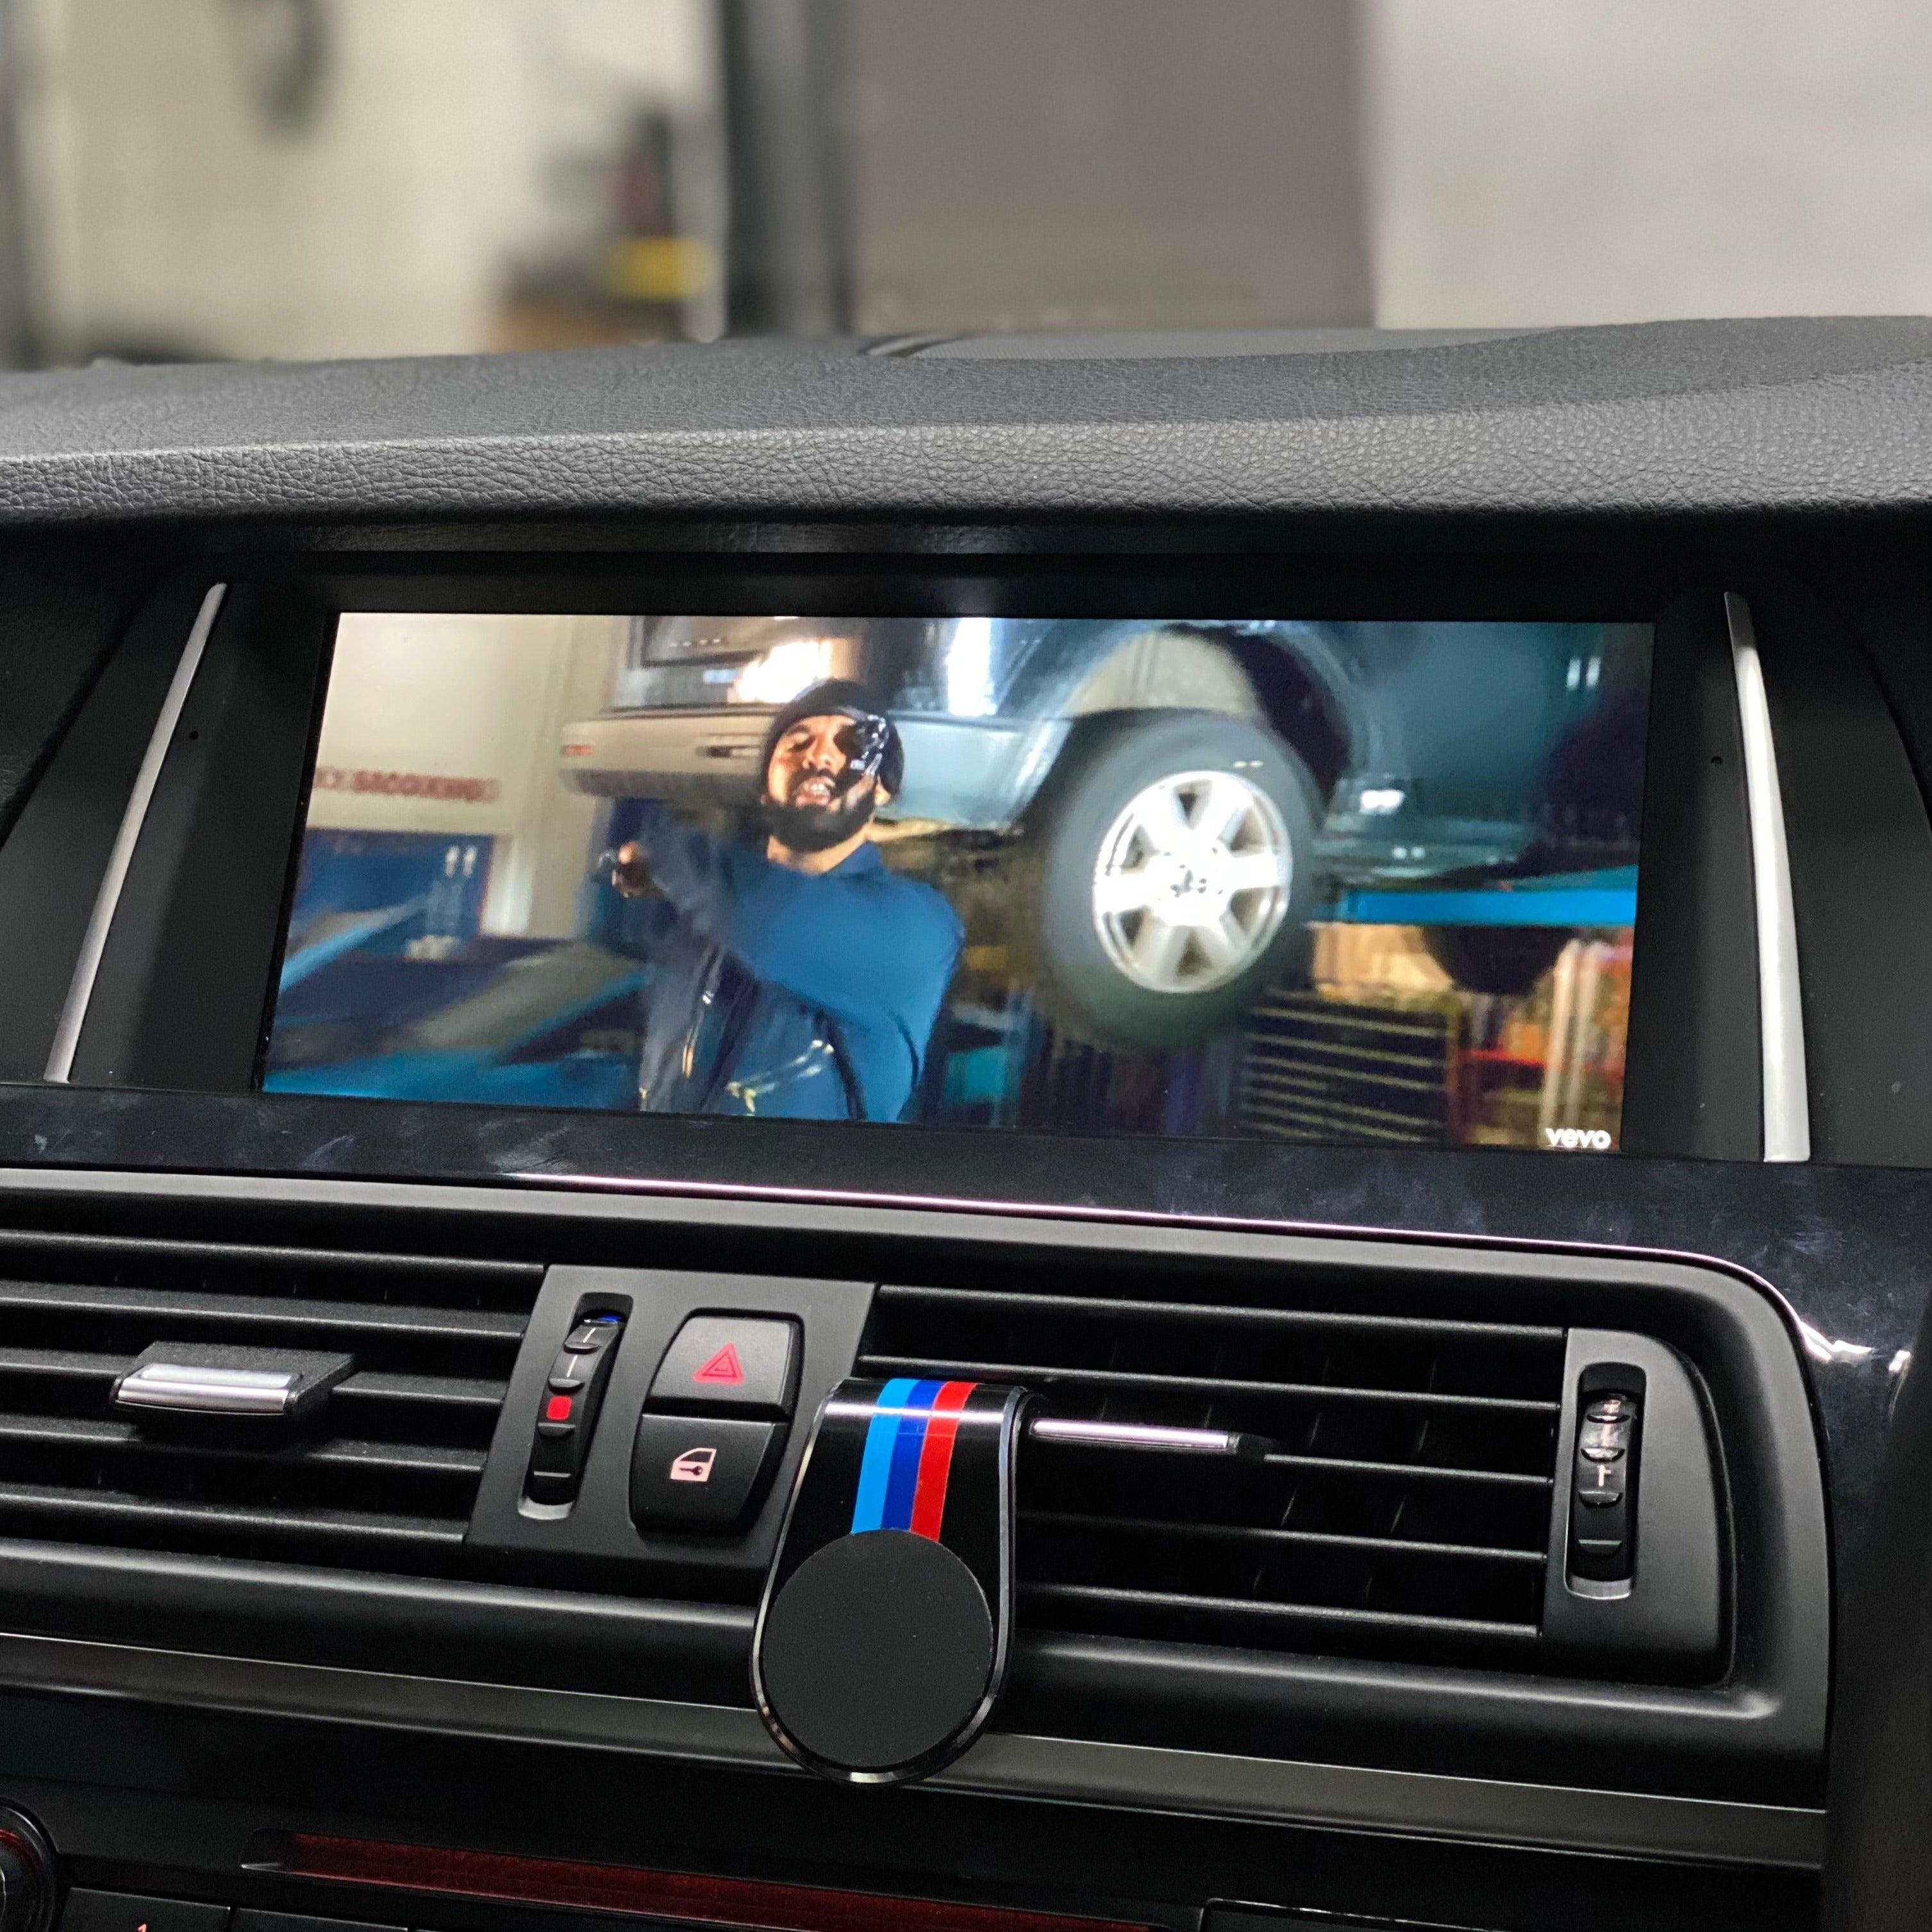 BMW 5 Series F10/F11 (2011-2017) CIC/NBT 10.25" Android Screen Upgrade and Wireless Apple CarPlay - AUTOSTYLE UK